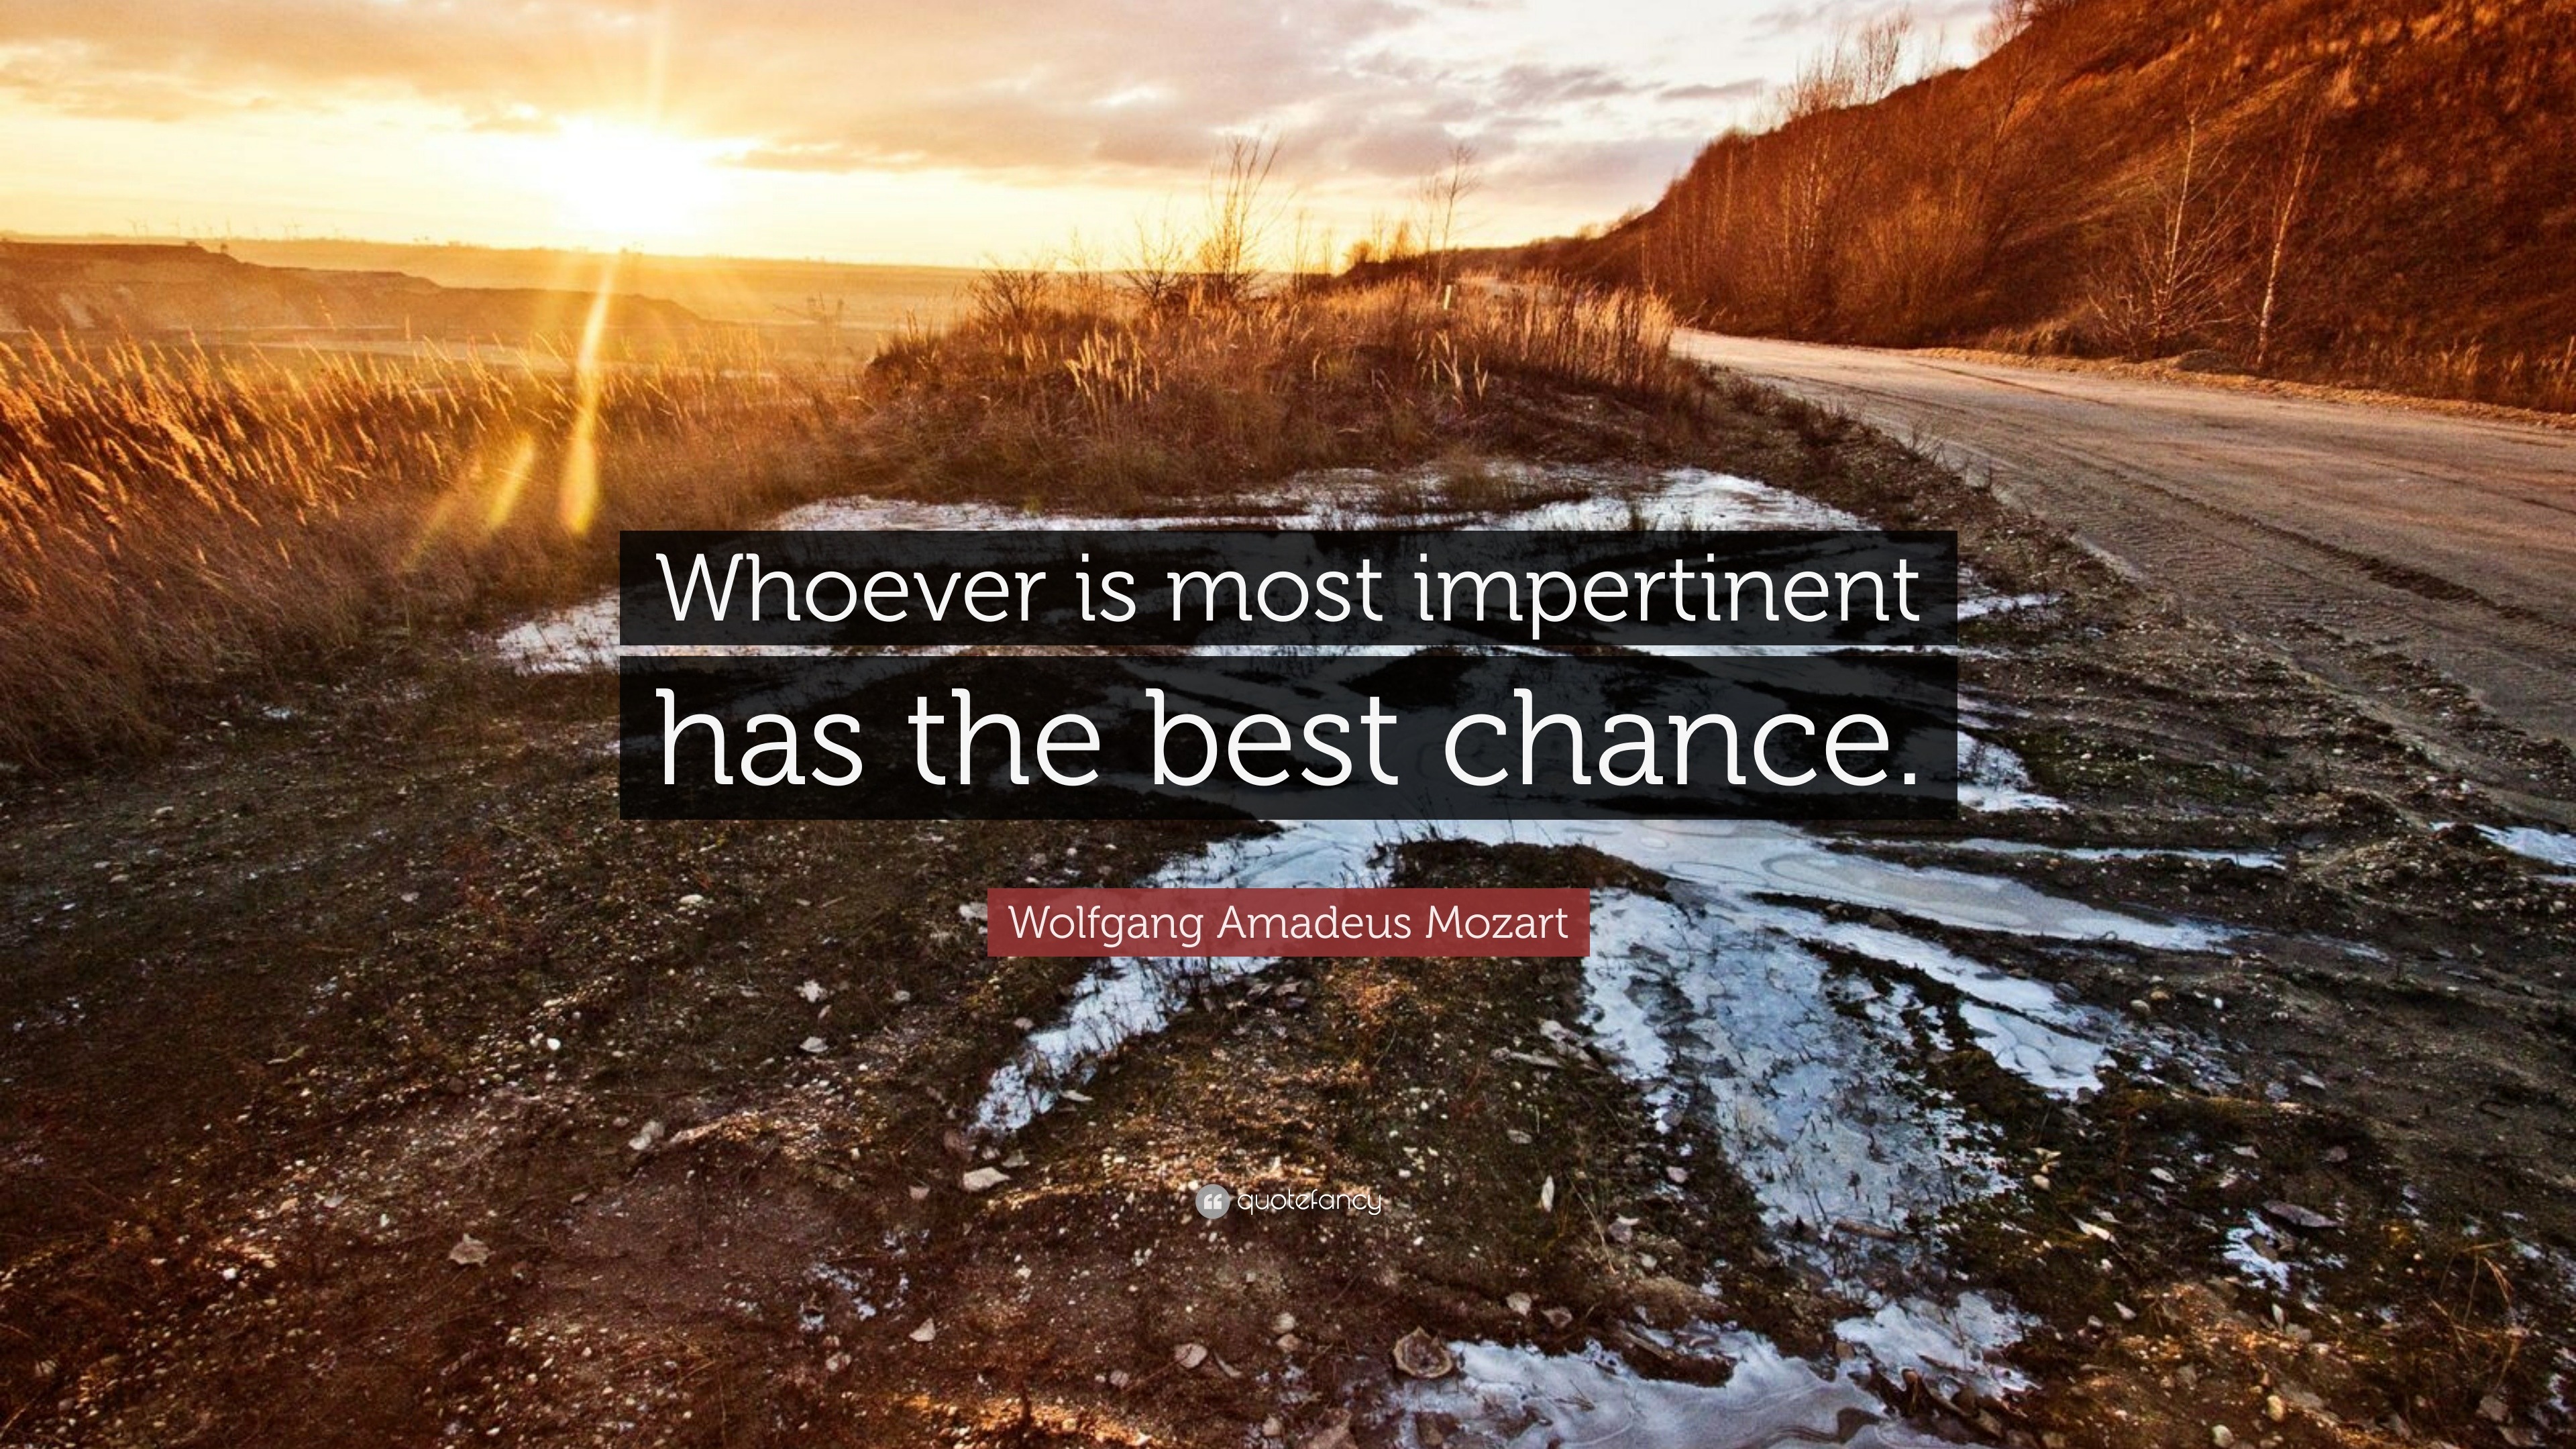 Wolfgang Amadeus Mozart Quote: “Whoever is most impertinent has the ...